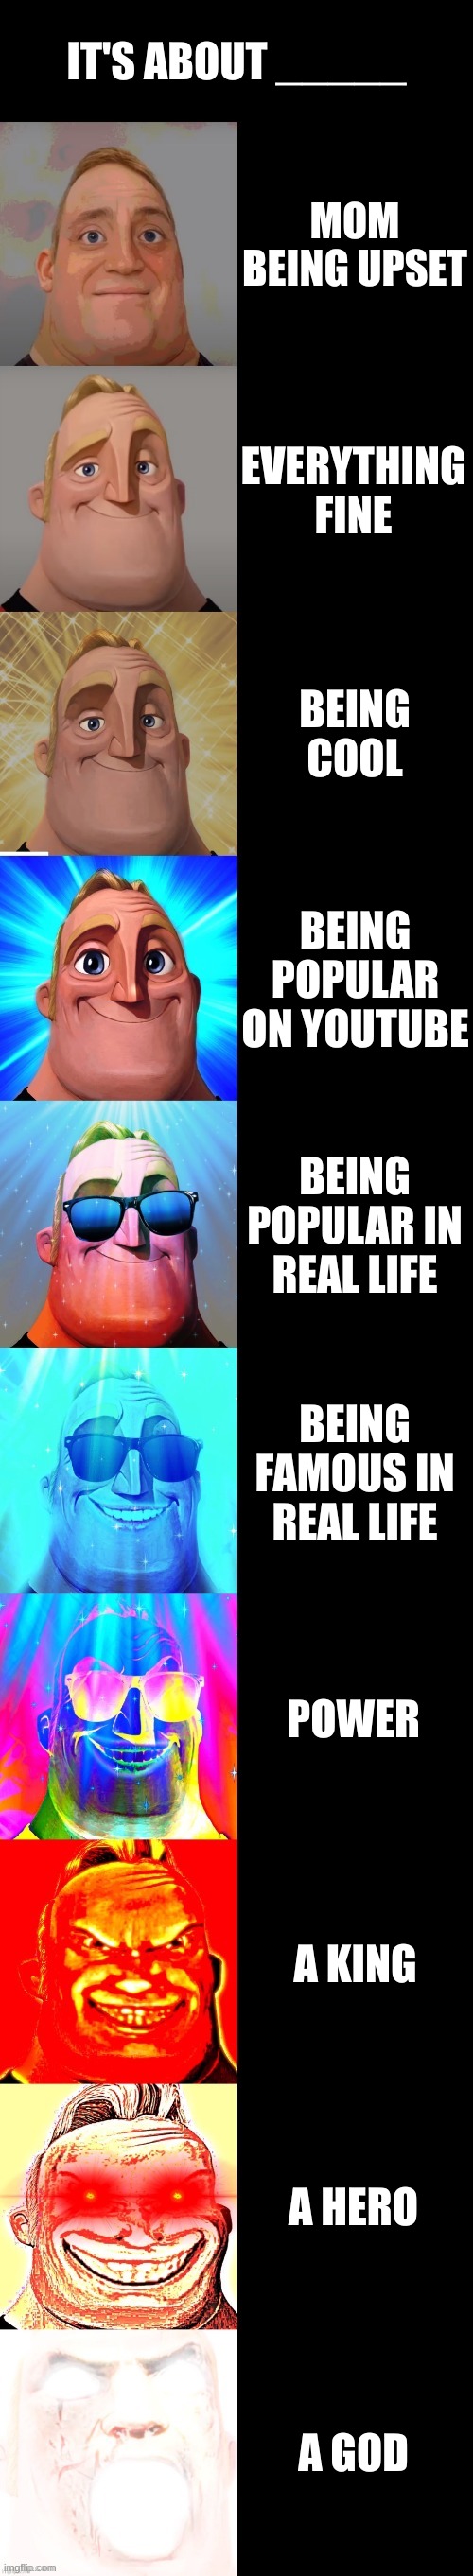 mr incredible becoming canny | IT'S ABOUT _____ MOM BEING UPSET EVERYTHING FINE BEING COOL BEING POPULAR ON YOUTUBE BEING POPULAR IN REAL LIFE BEING FAMOUS IN REAL LIFE PO | image tagged in mr incredible becoming canny | made w/ Imgflip meme maker